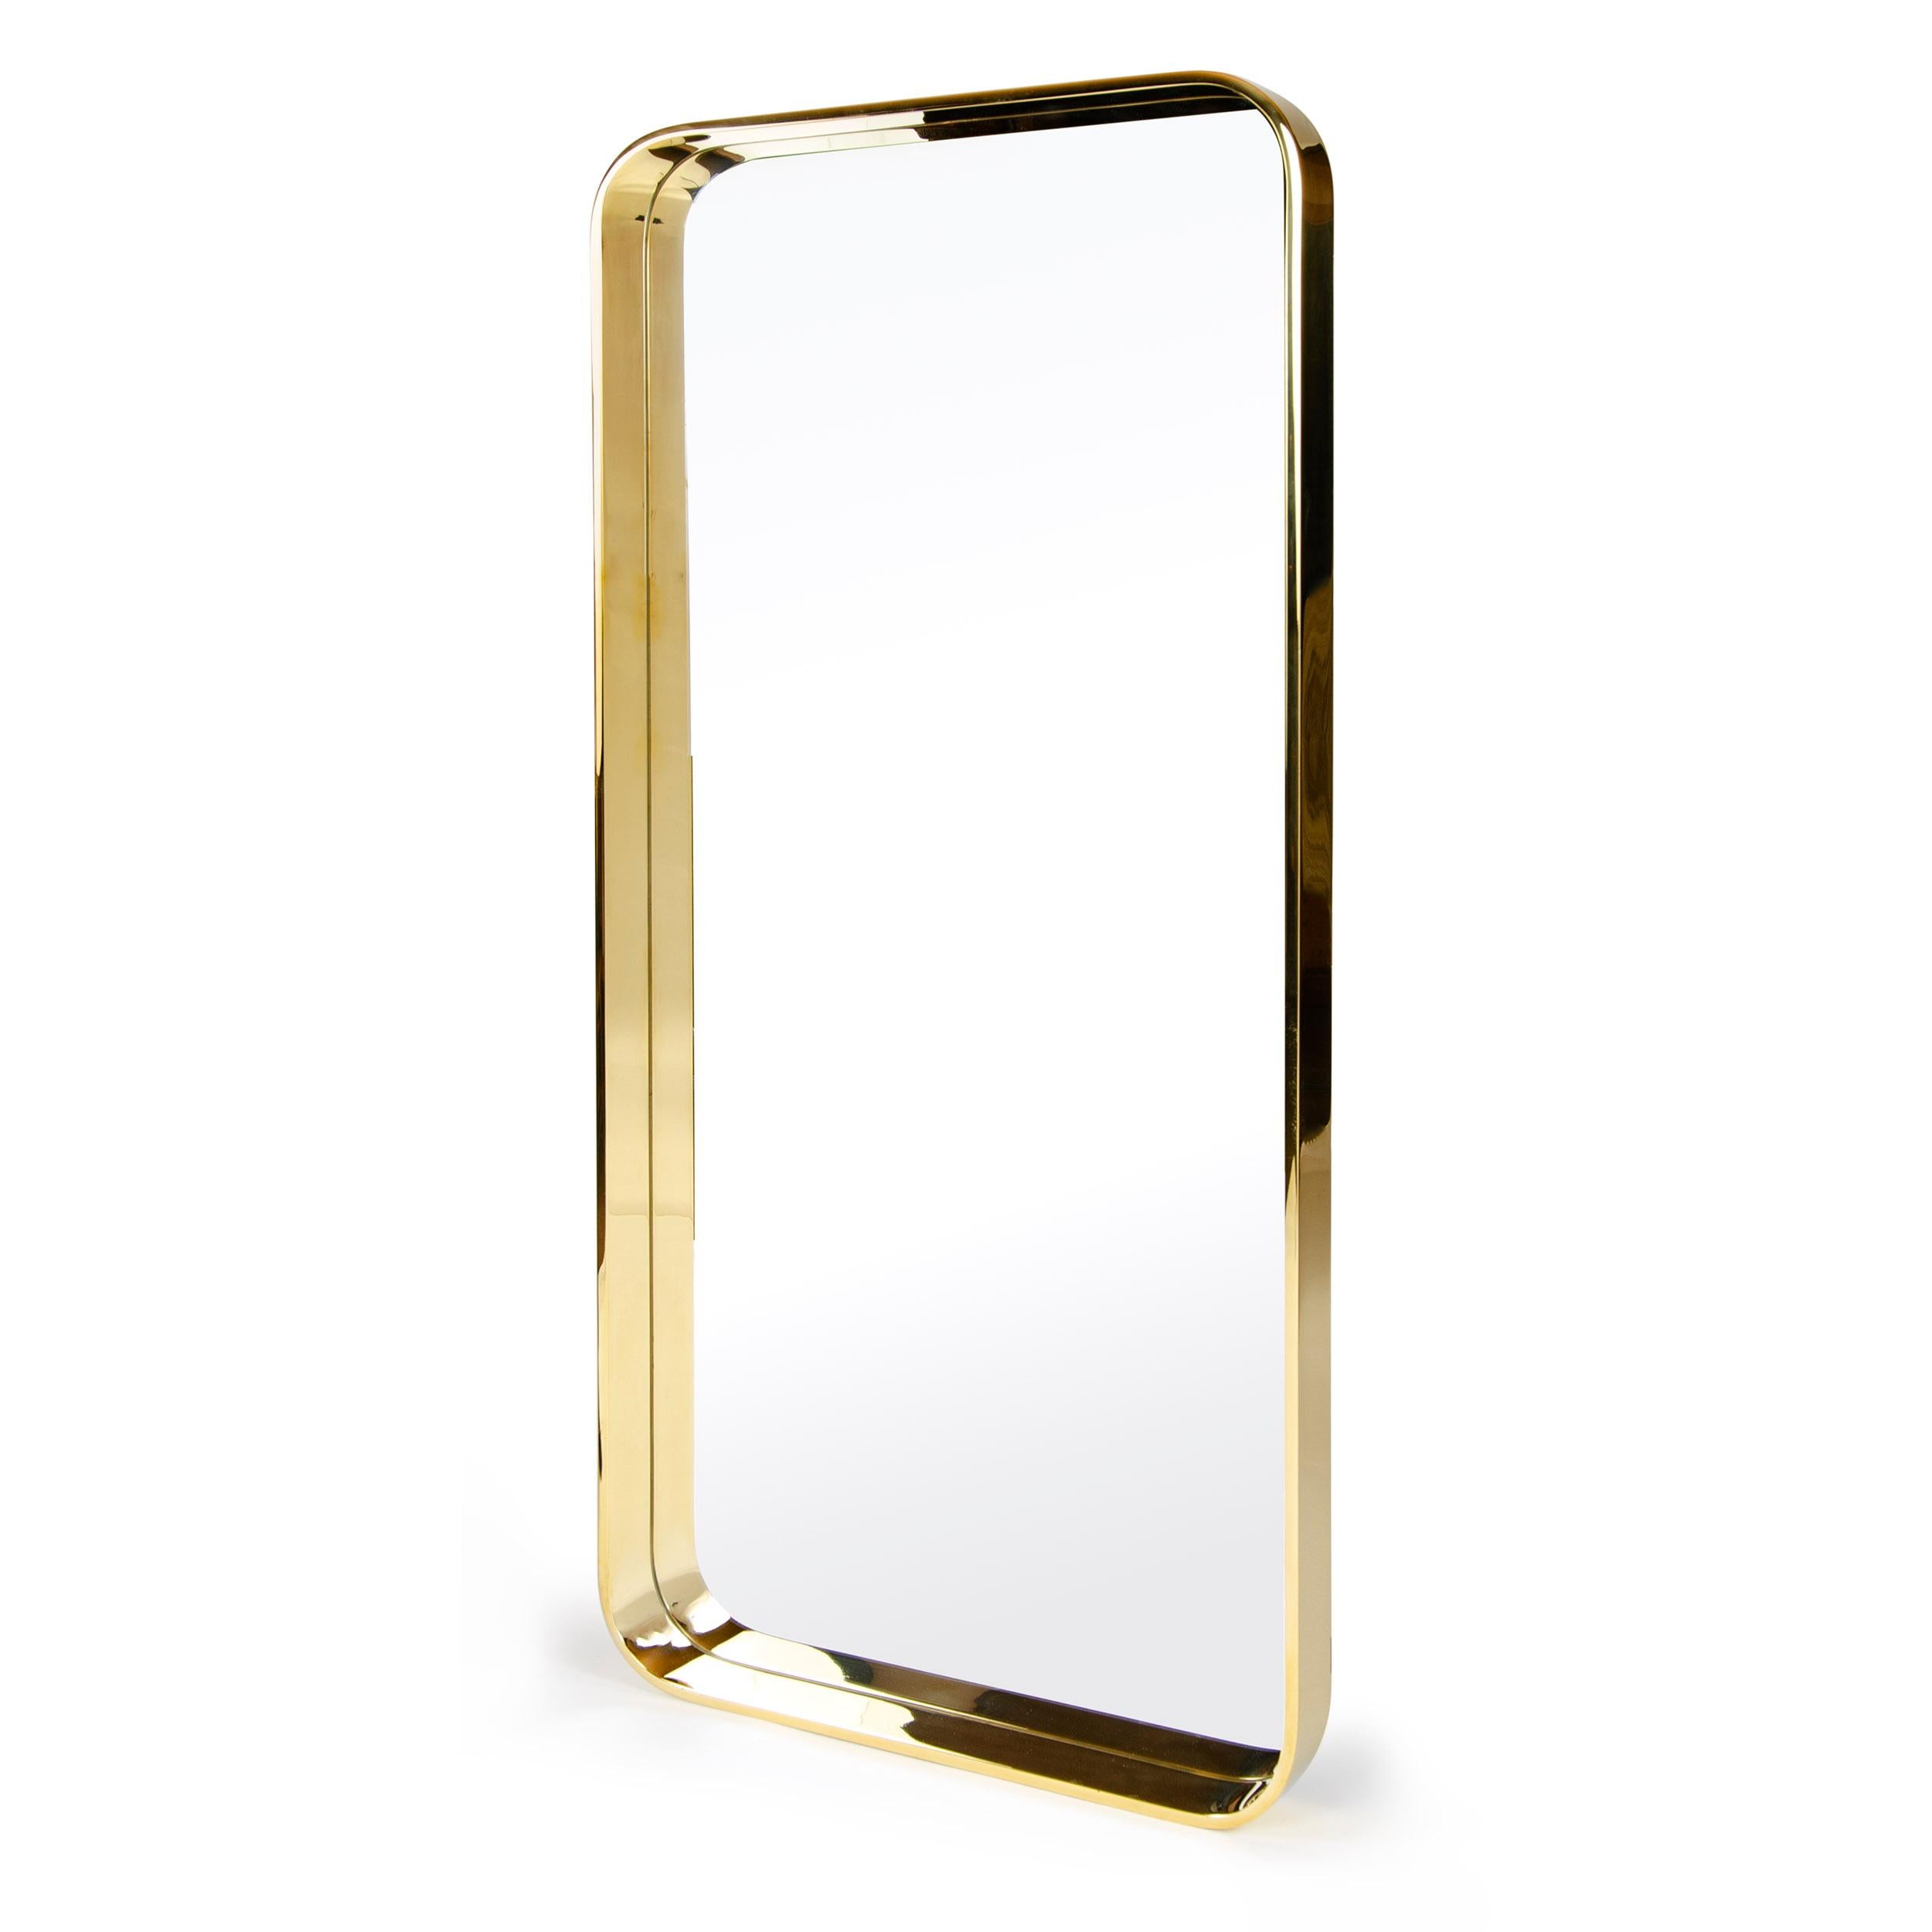 A Wyeth original mirror in solid bronze bar with wide radius corners. Available in custom sizes and finishes.